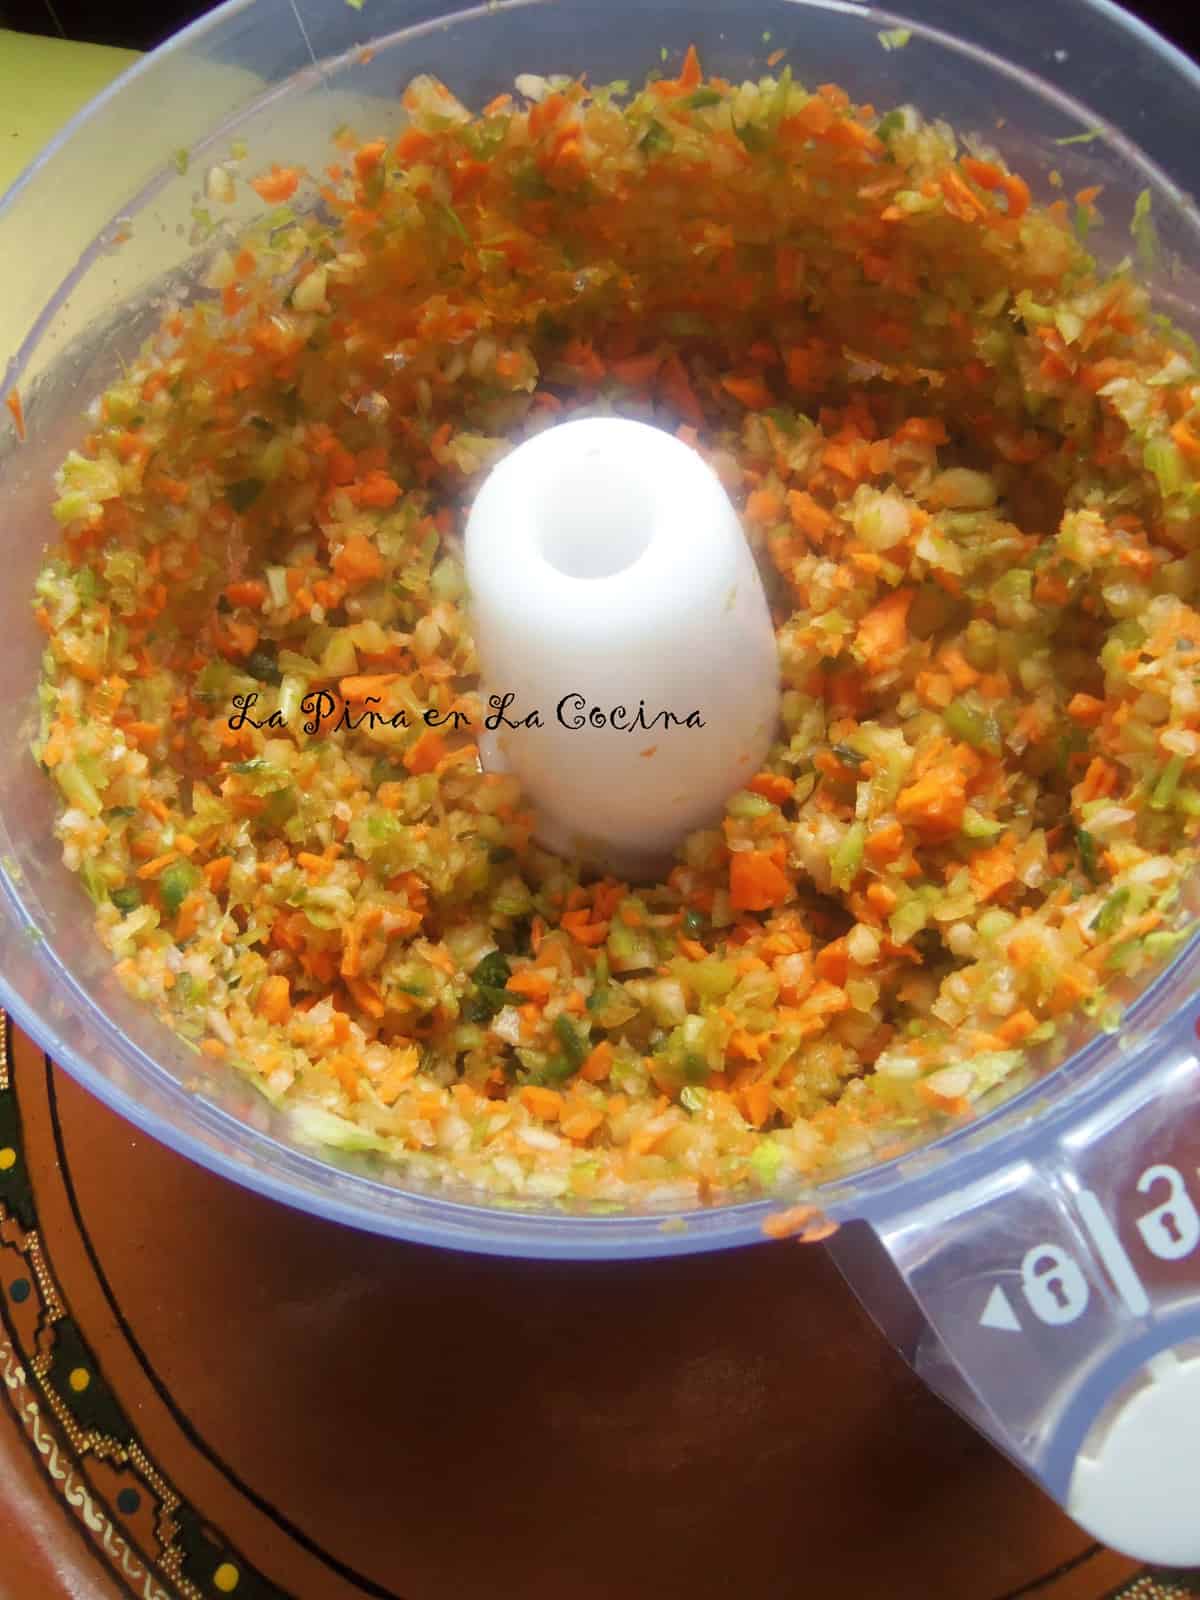 Pulse to process for finely chopped veggies.